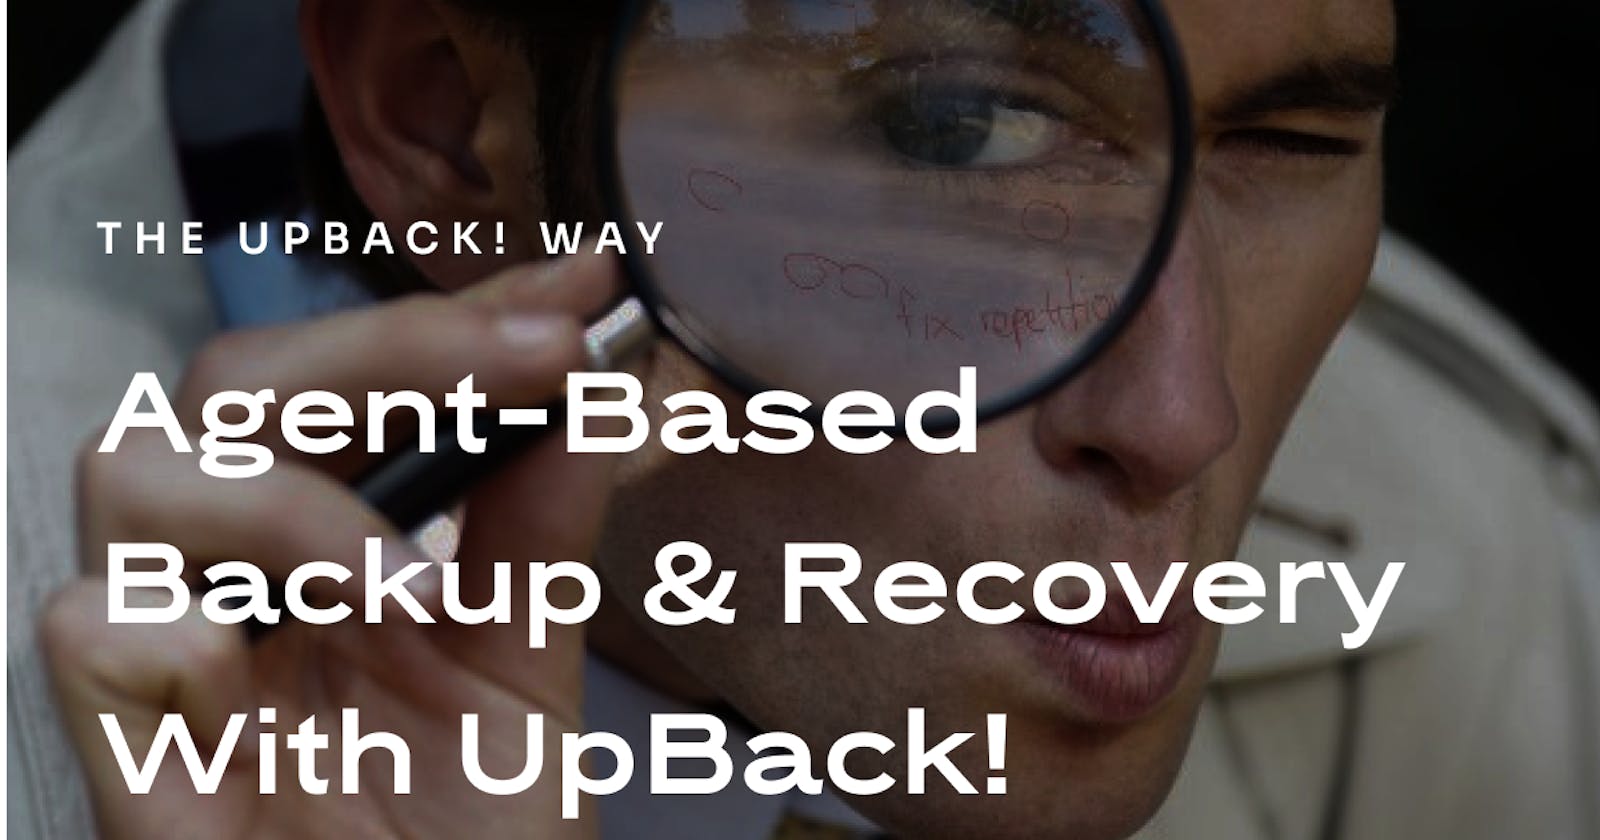 Innovative Full Backup Solutions by UpBack! Tailored for Today's Business Needs